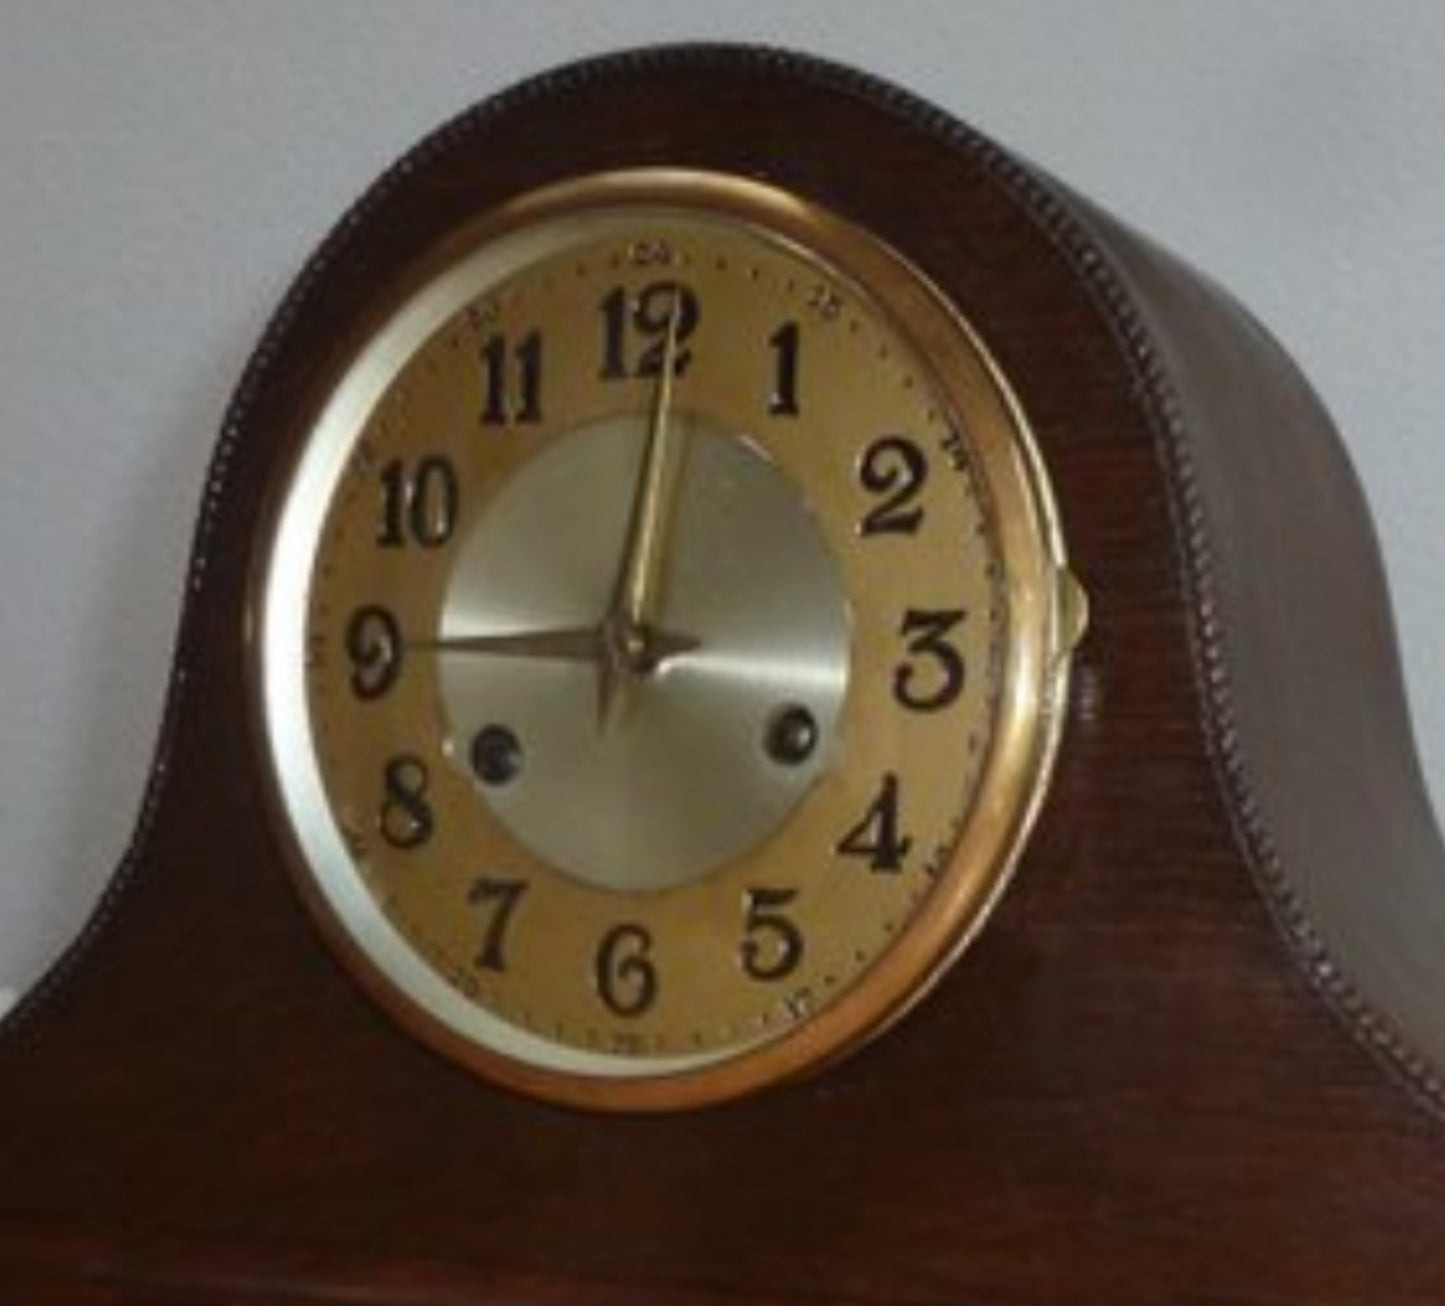 Urgos (Germany) 1930's Mantle Clock - Half Hour Chime w Key - Working Condition